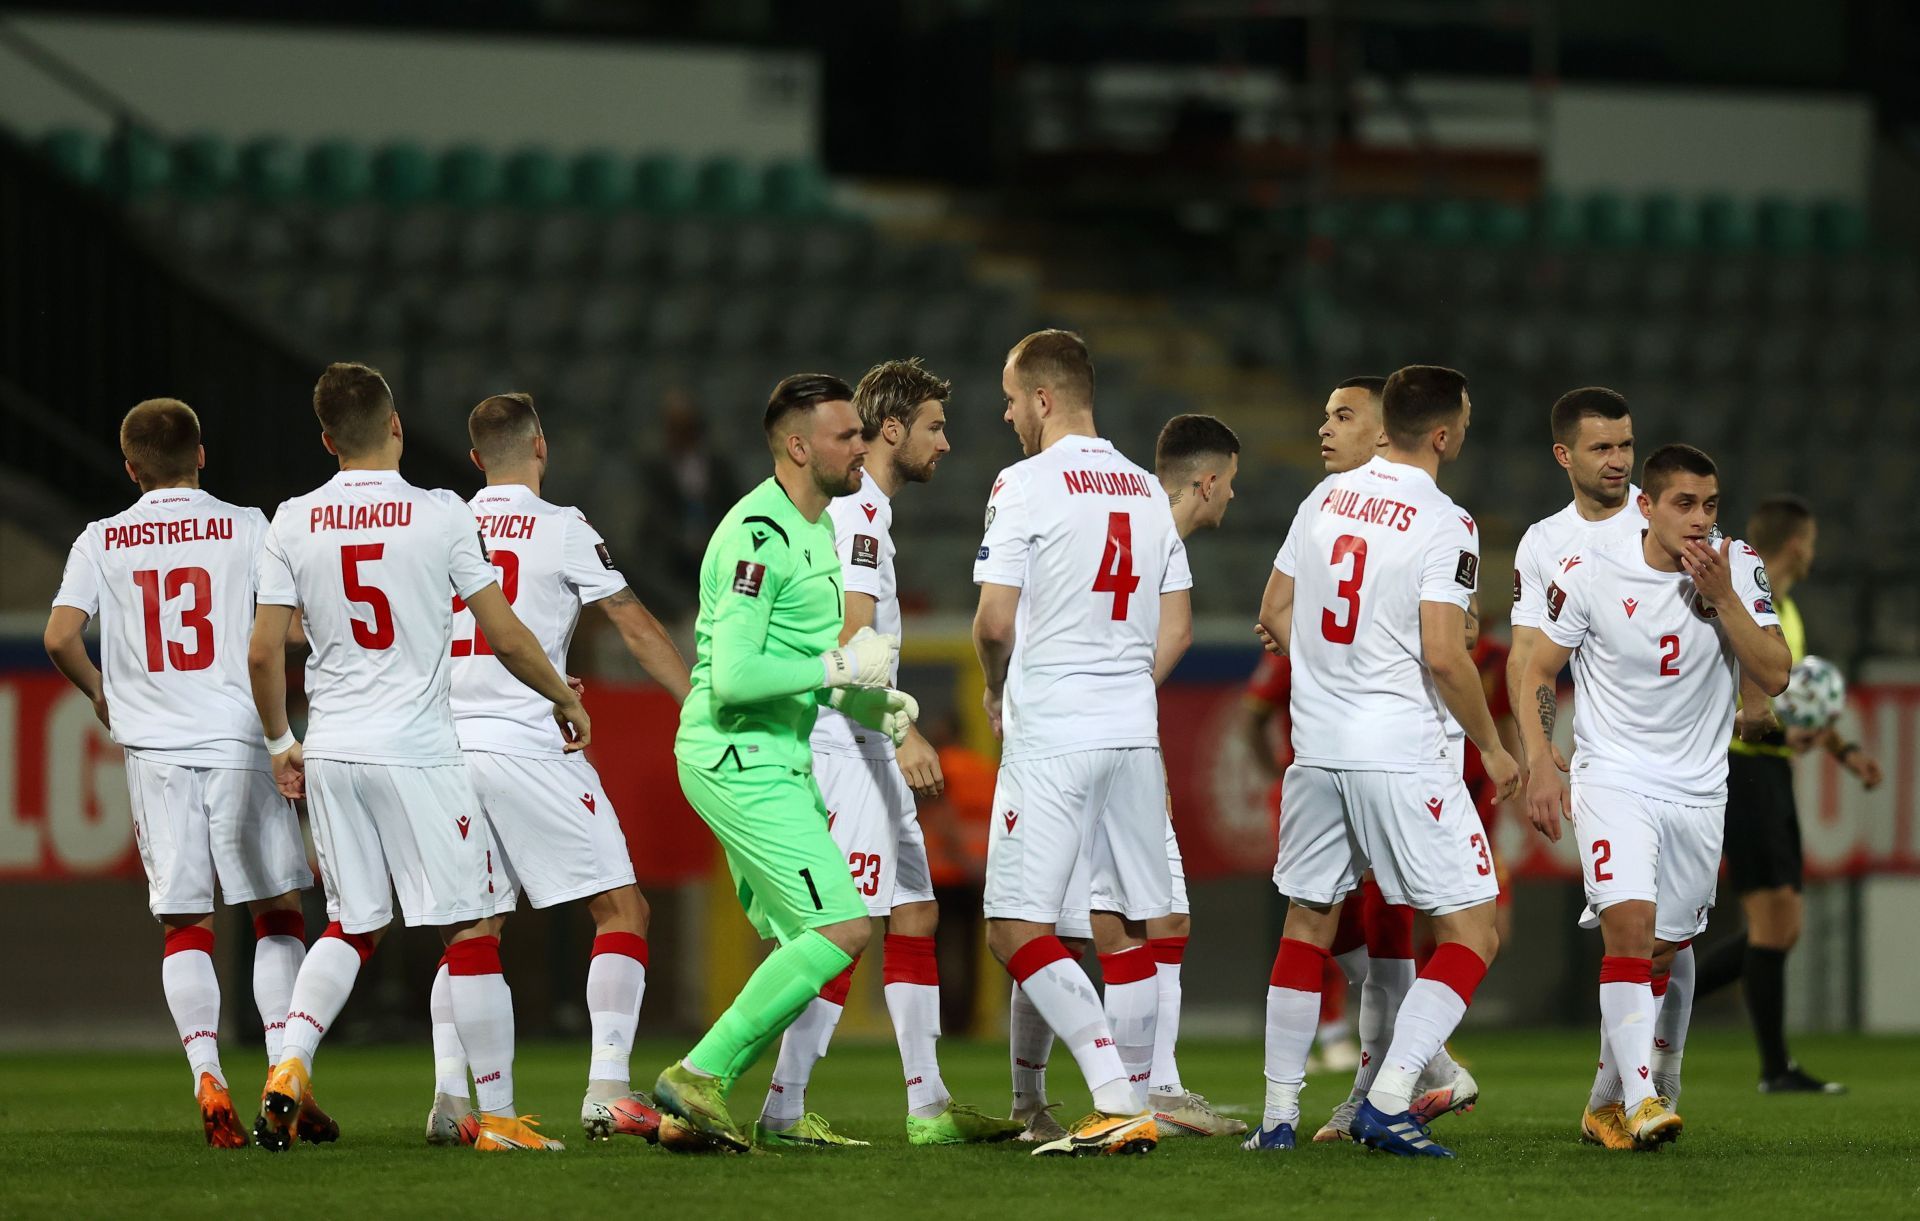 Belarus face Slovakia in their UEFA Nations League opener on Friday